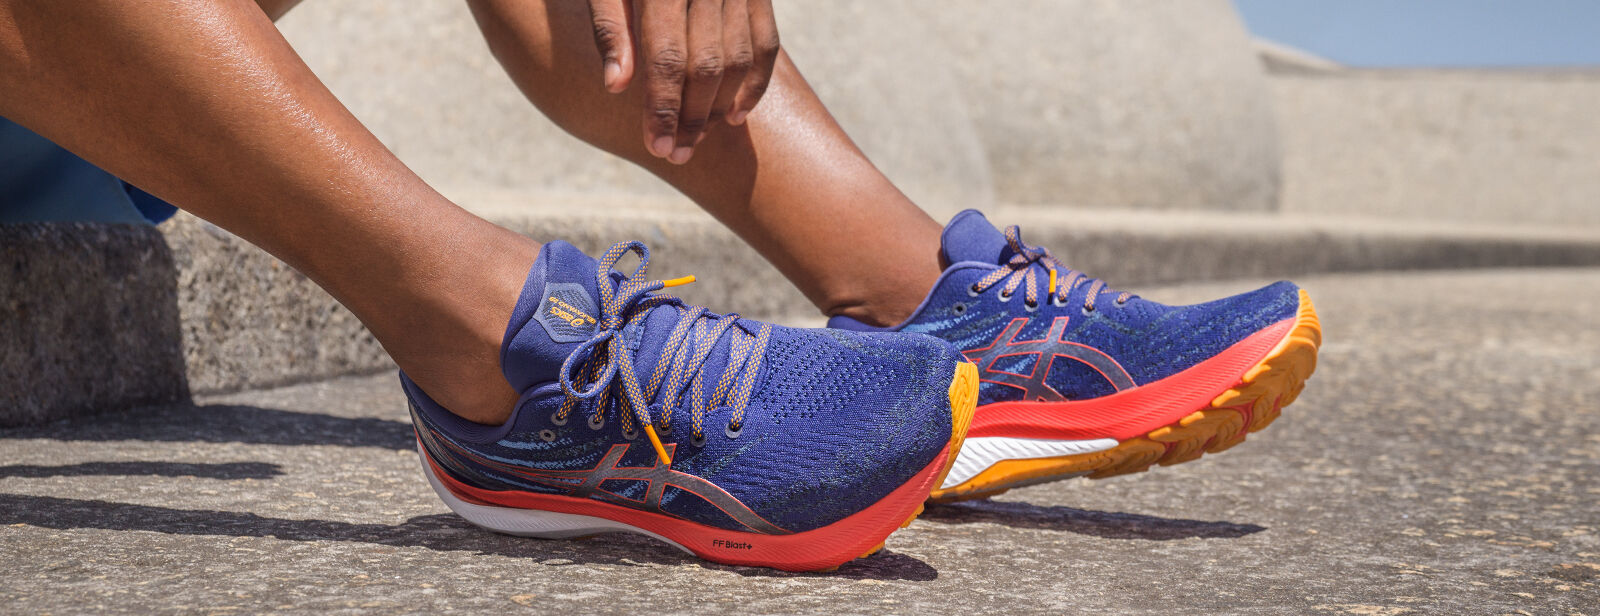 How to Choose Running Shoes for Wide Feet | ASICS | ASICS